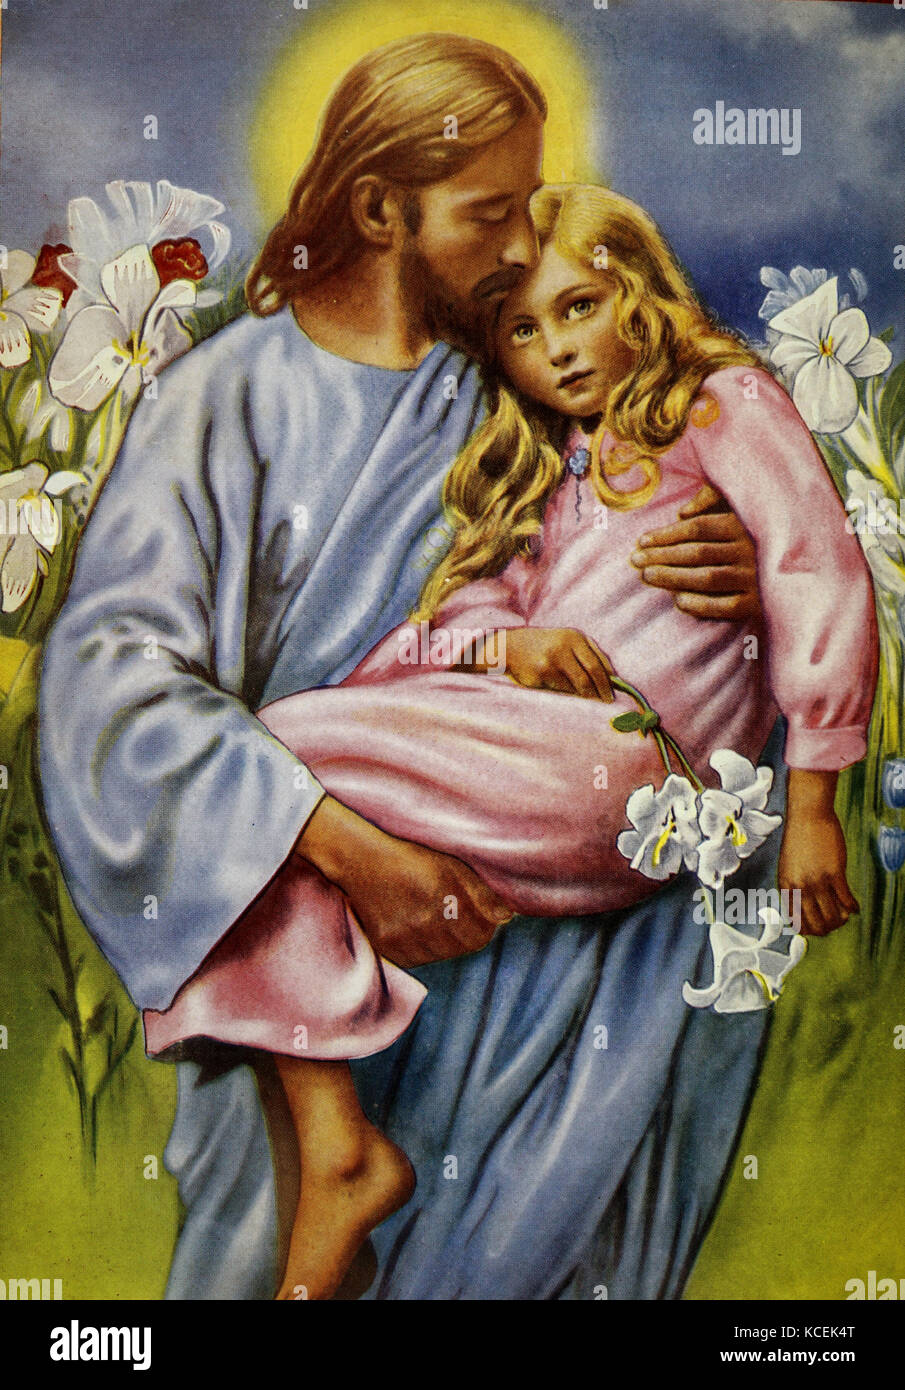 Painting depicting Jesus Christ holding a young girl in his arms. Dated 20th Century Stock Photo